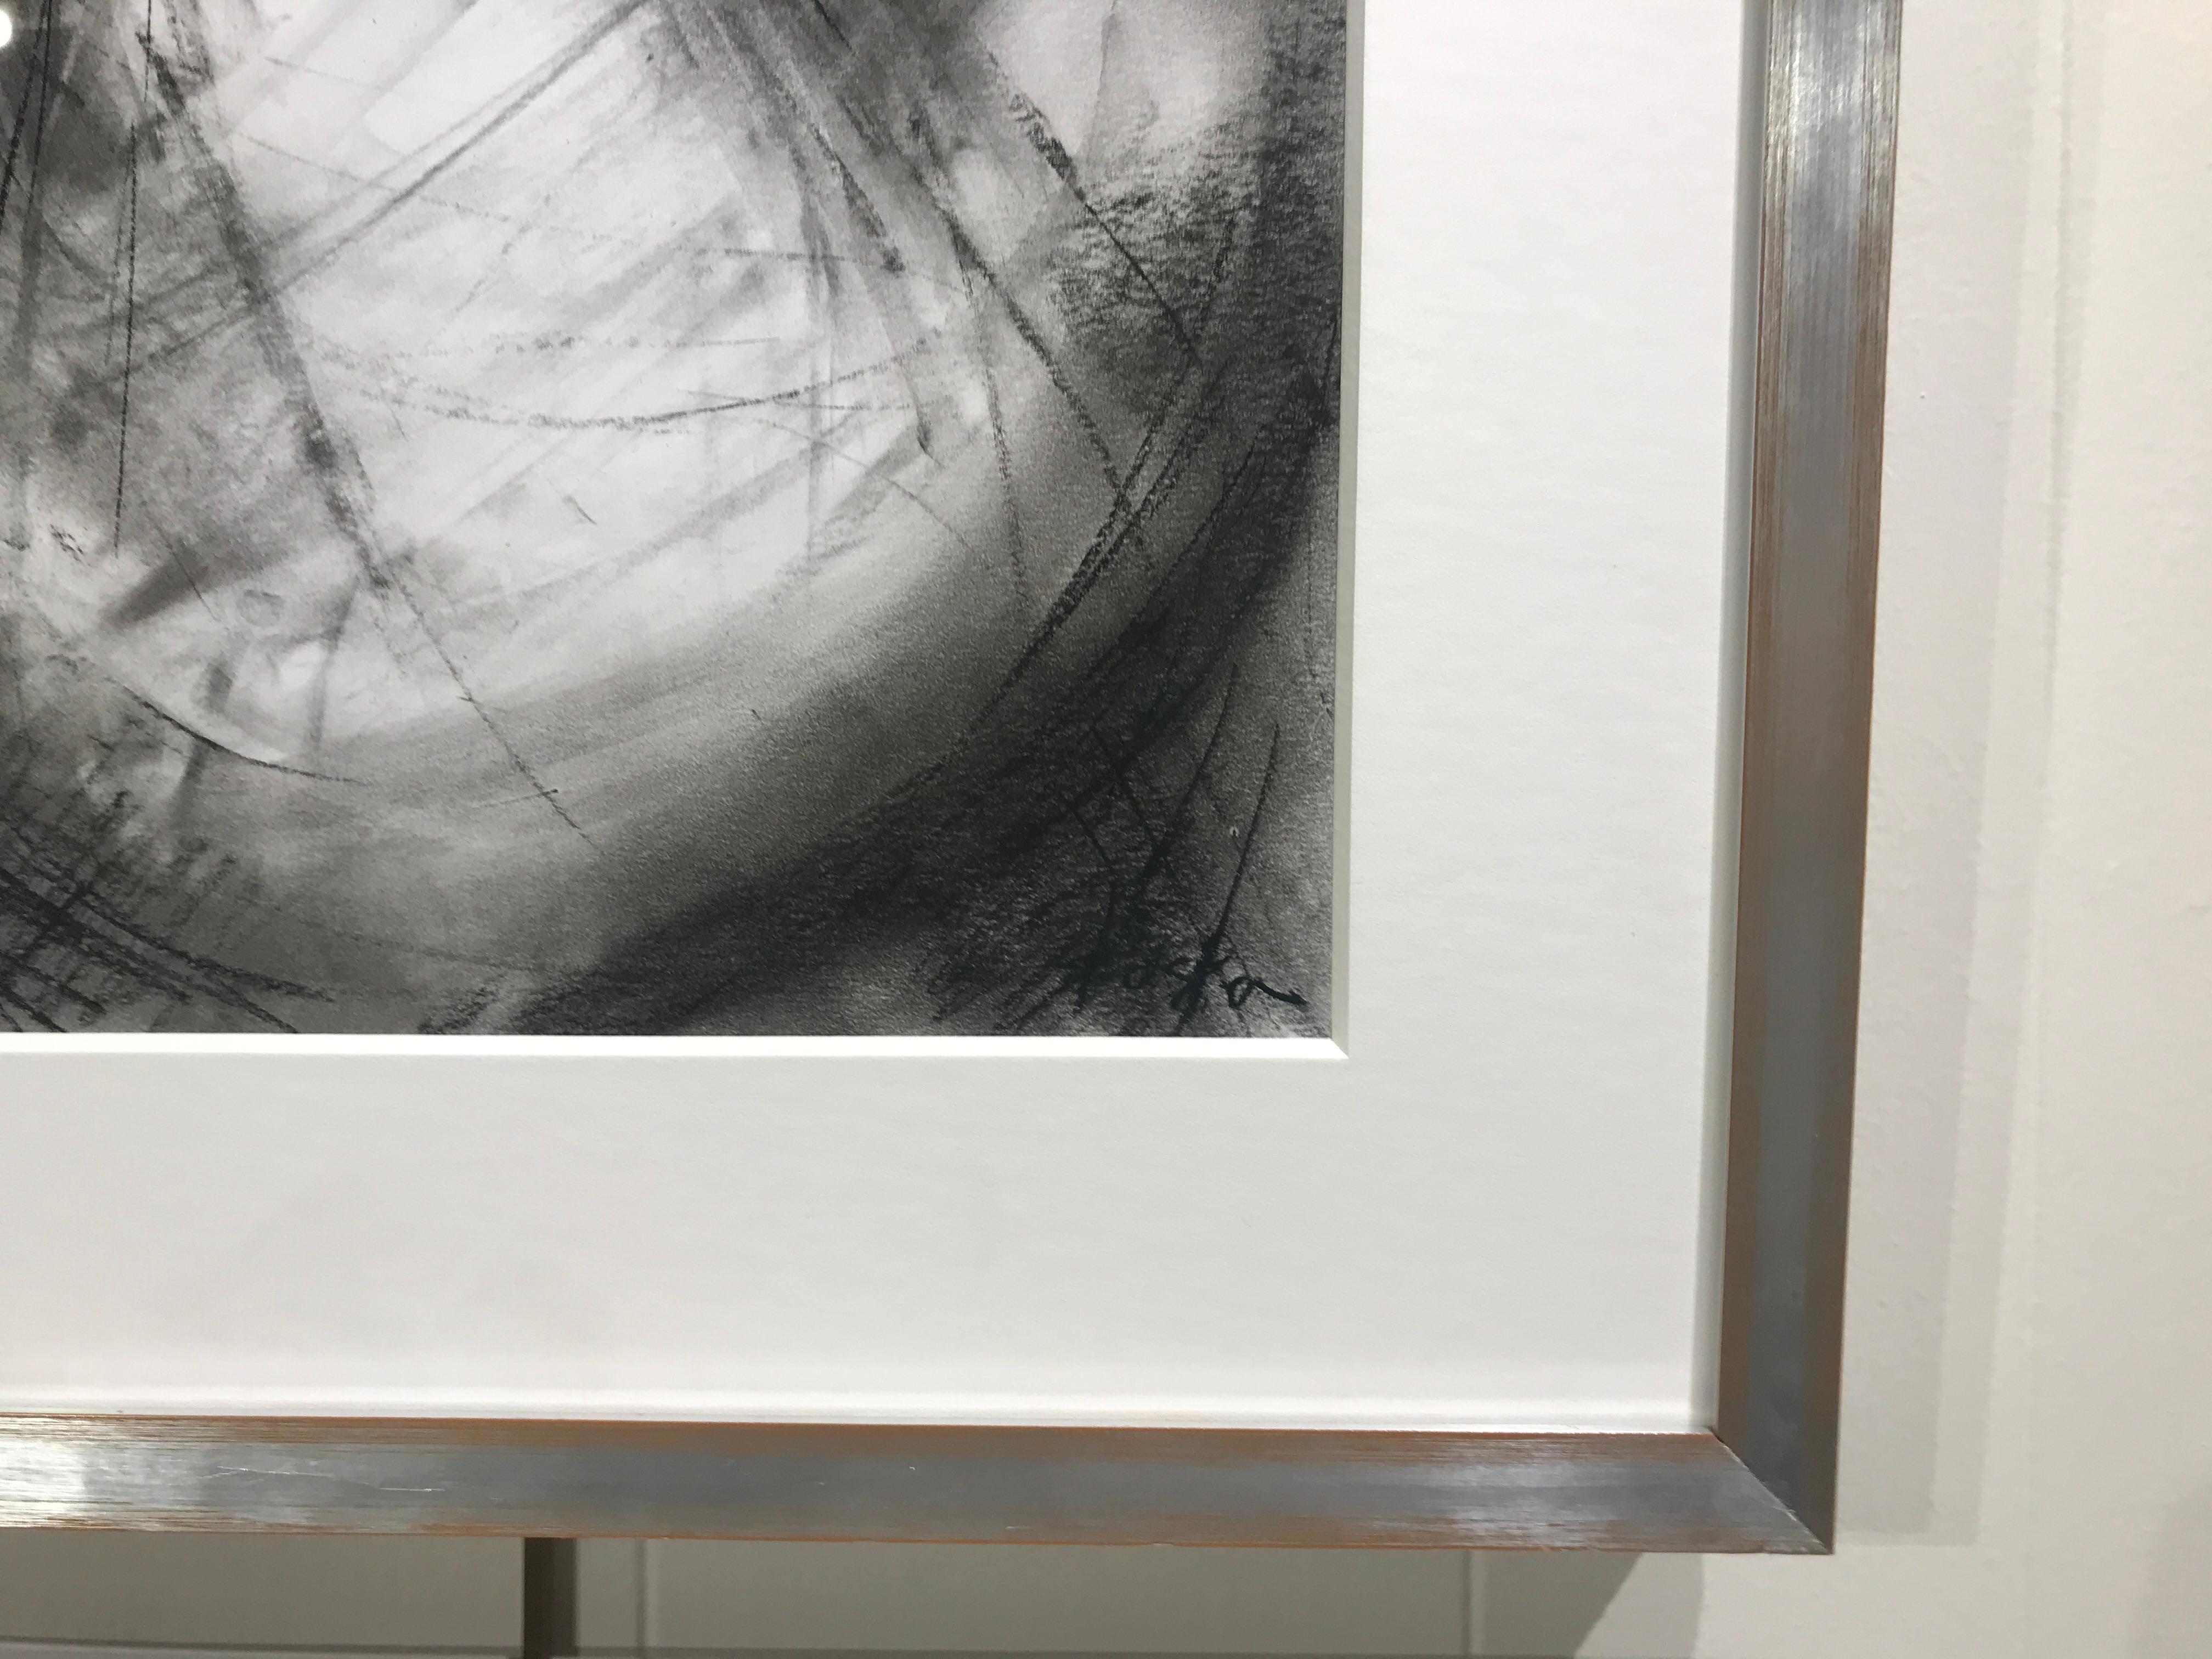 Currents III by Gail Foster 2018 Petite Framed Charcoal on Paper Figurative 4